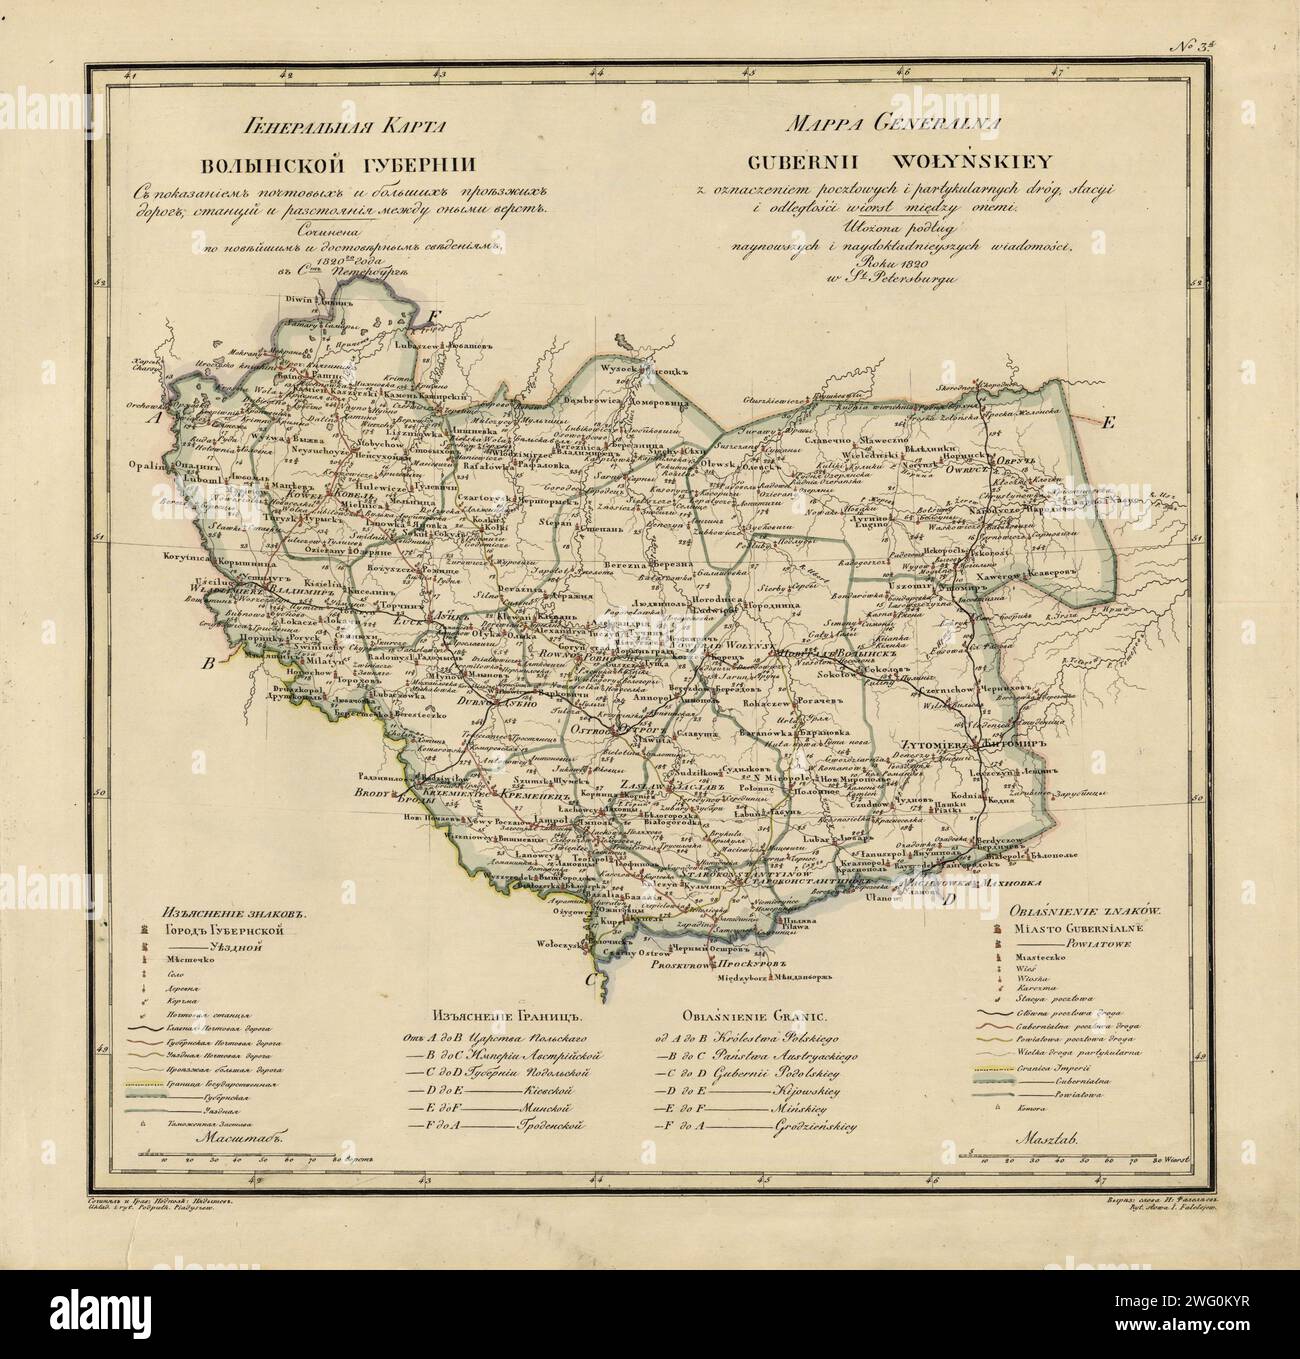 General Map of Volhynia Province: Showing Postal and Major Roads, Stations and the Distance in Versts between Them, 1820. This 1820 map of Volhynia Provinceis from a larger work,Geograficheskii atlas Rossiiskoi imperii, tsarstva Pol'skogo i velikogo kniazhestva Finliandskogo(Geographical atlas of the Russian Empire, the Kingdom of Poland, and the Grand Duchy of Finland), containing 60 maps of the Russian Empire. Compiled and engraved by Colonel V.P. Piadyshev, it reflects the detailed mapping carried out by Russian military cartographers in the first quarter of the 19th century. The map shows Stock Photo